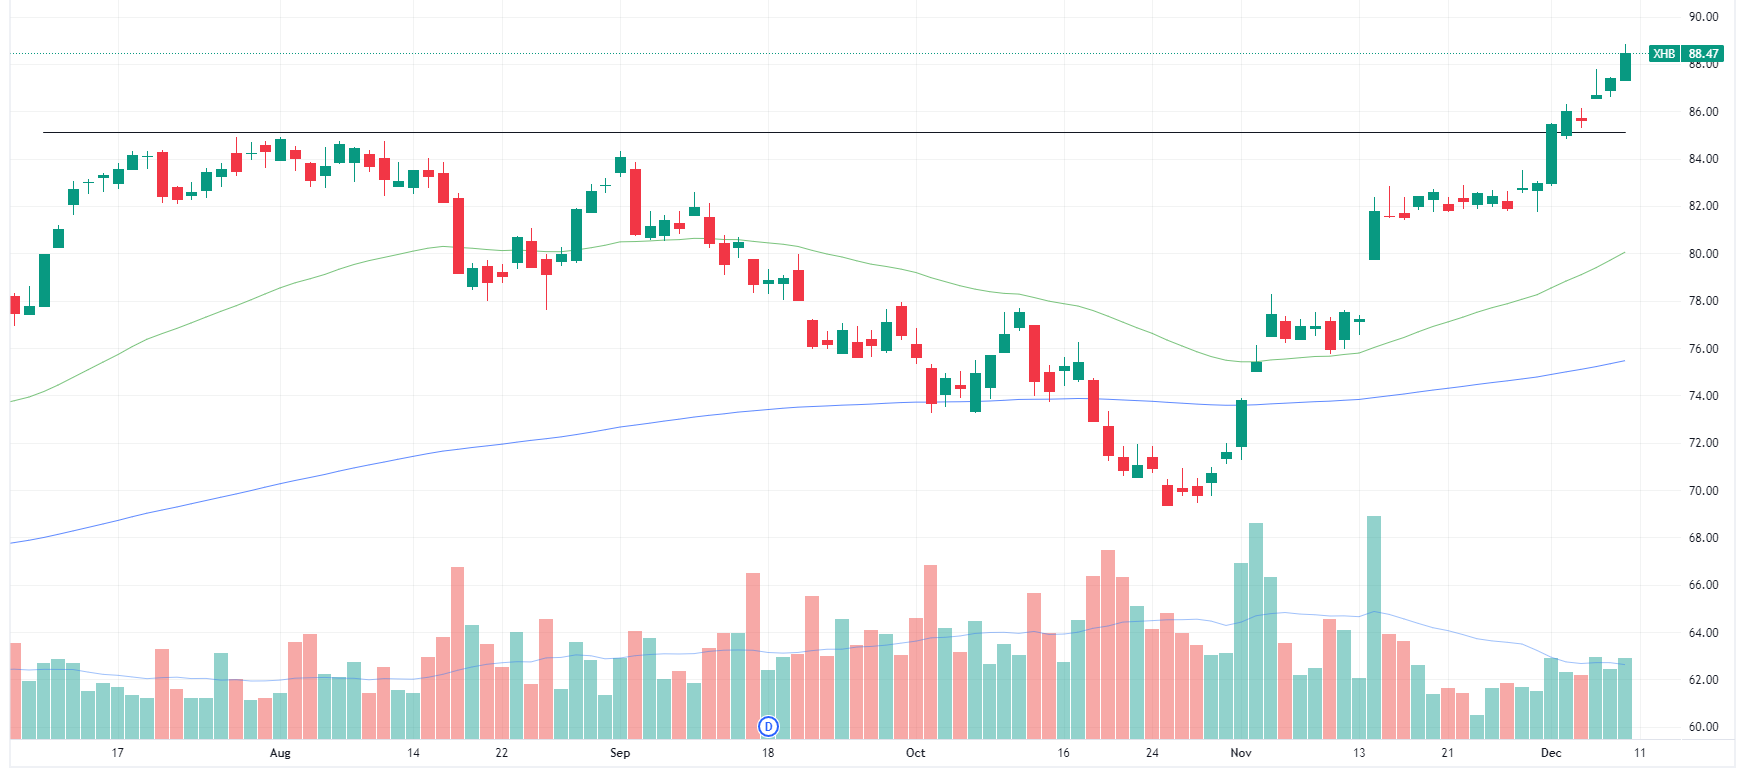 SPDR Homebuilders ETF daily chart (Source: TradingView)